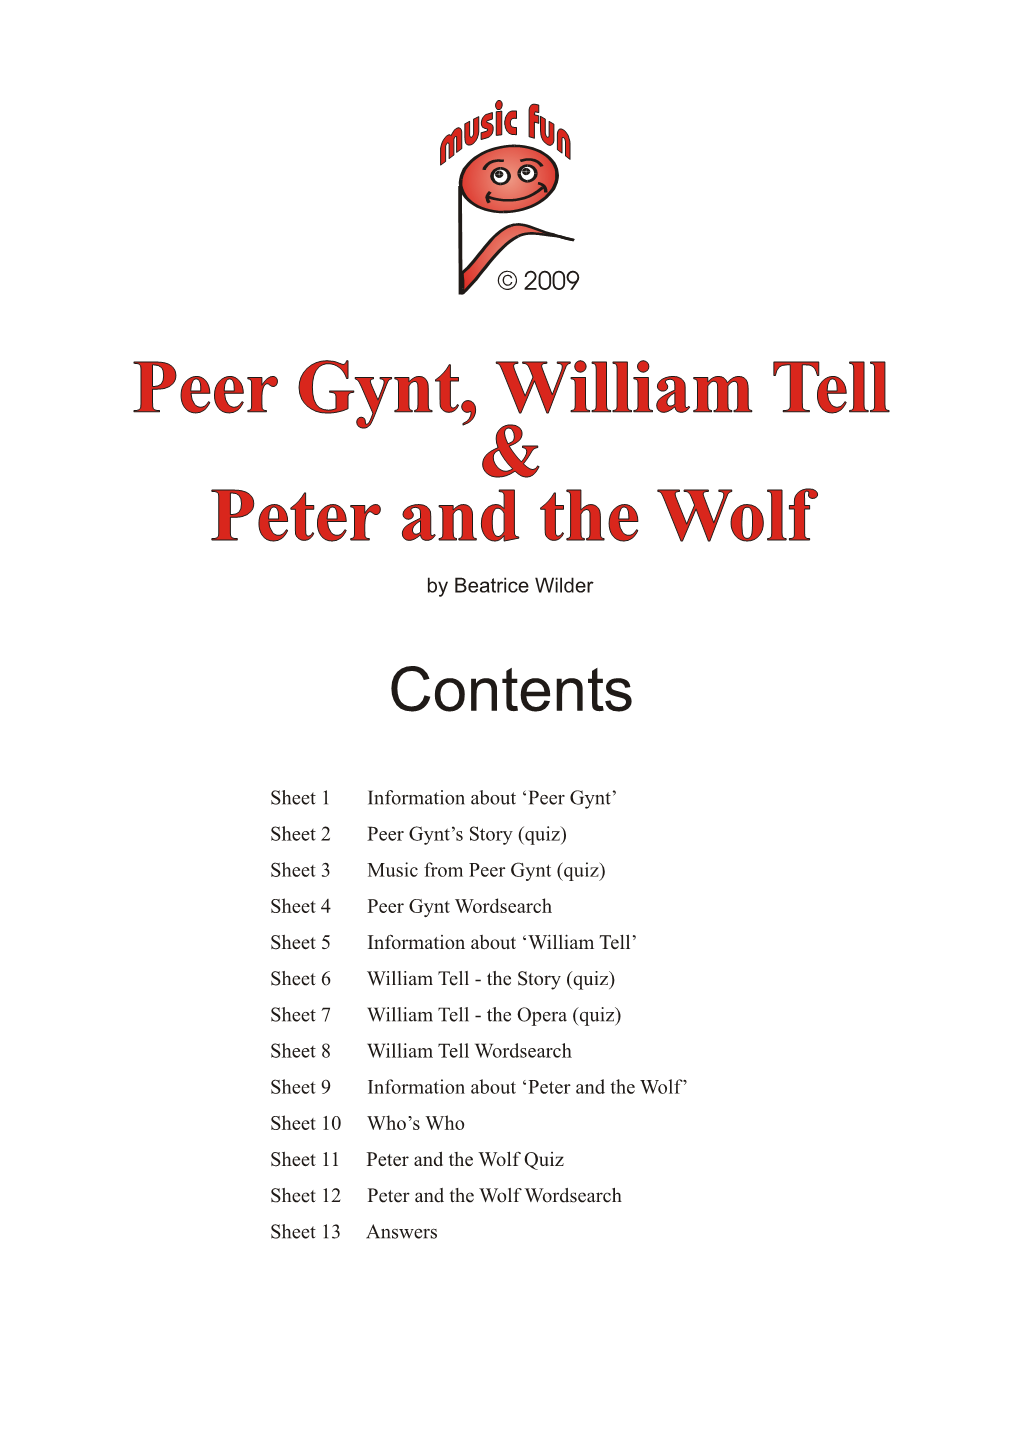 Peer Gynt, William Tell and Peter and the Wolf